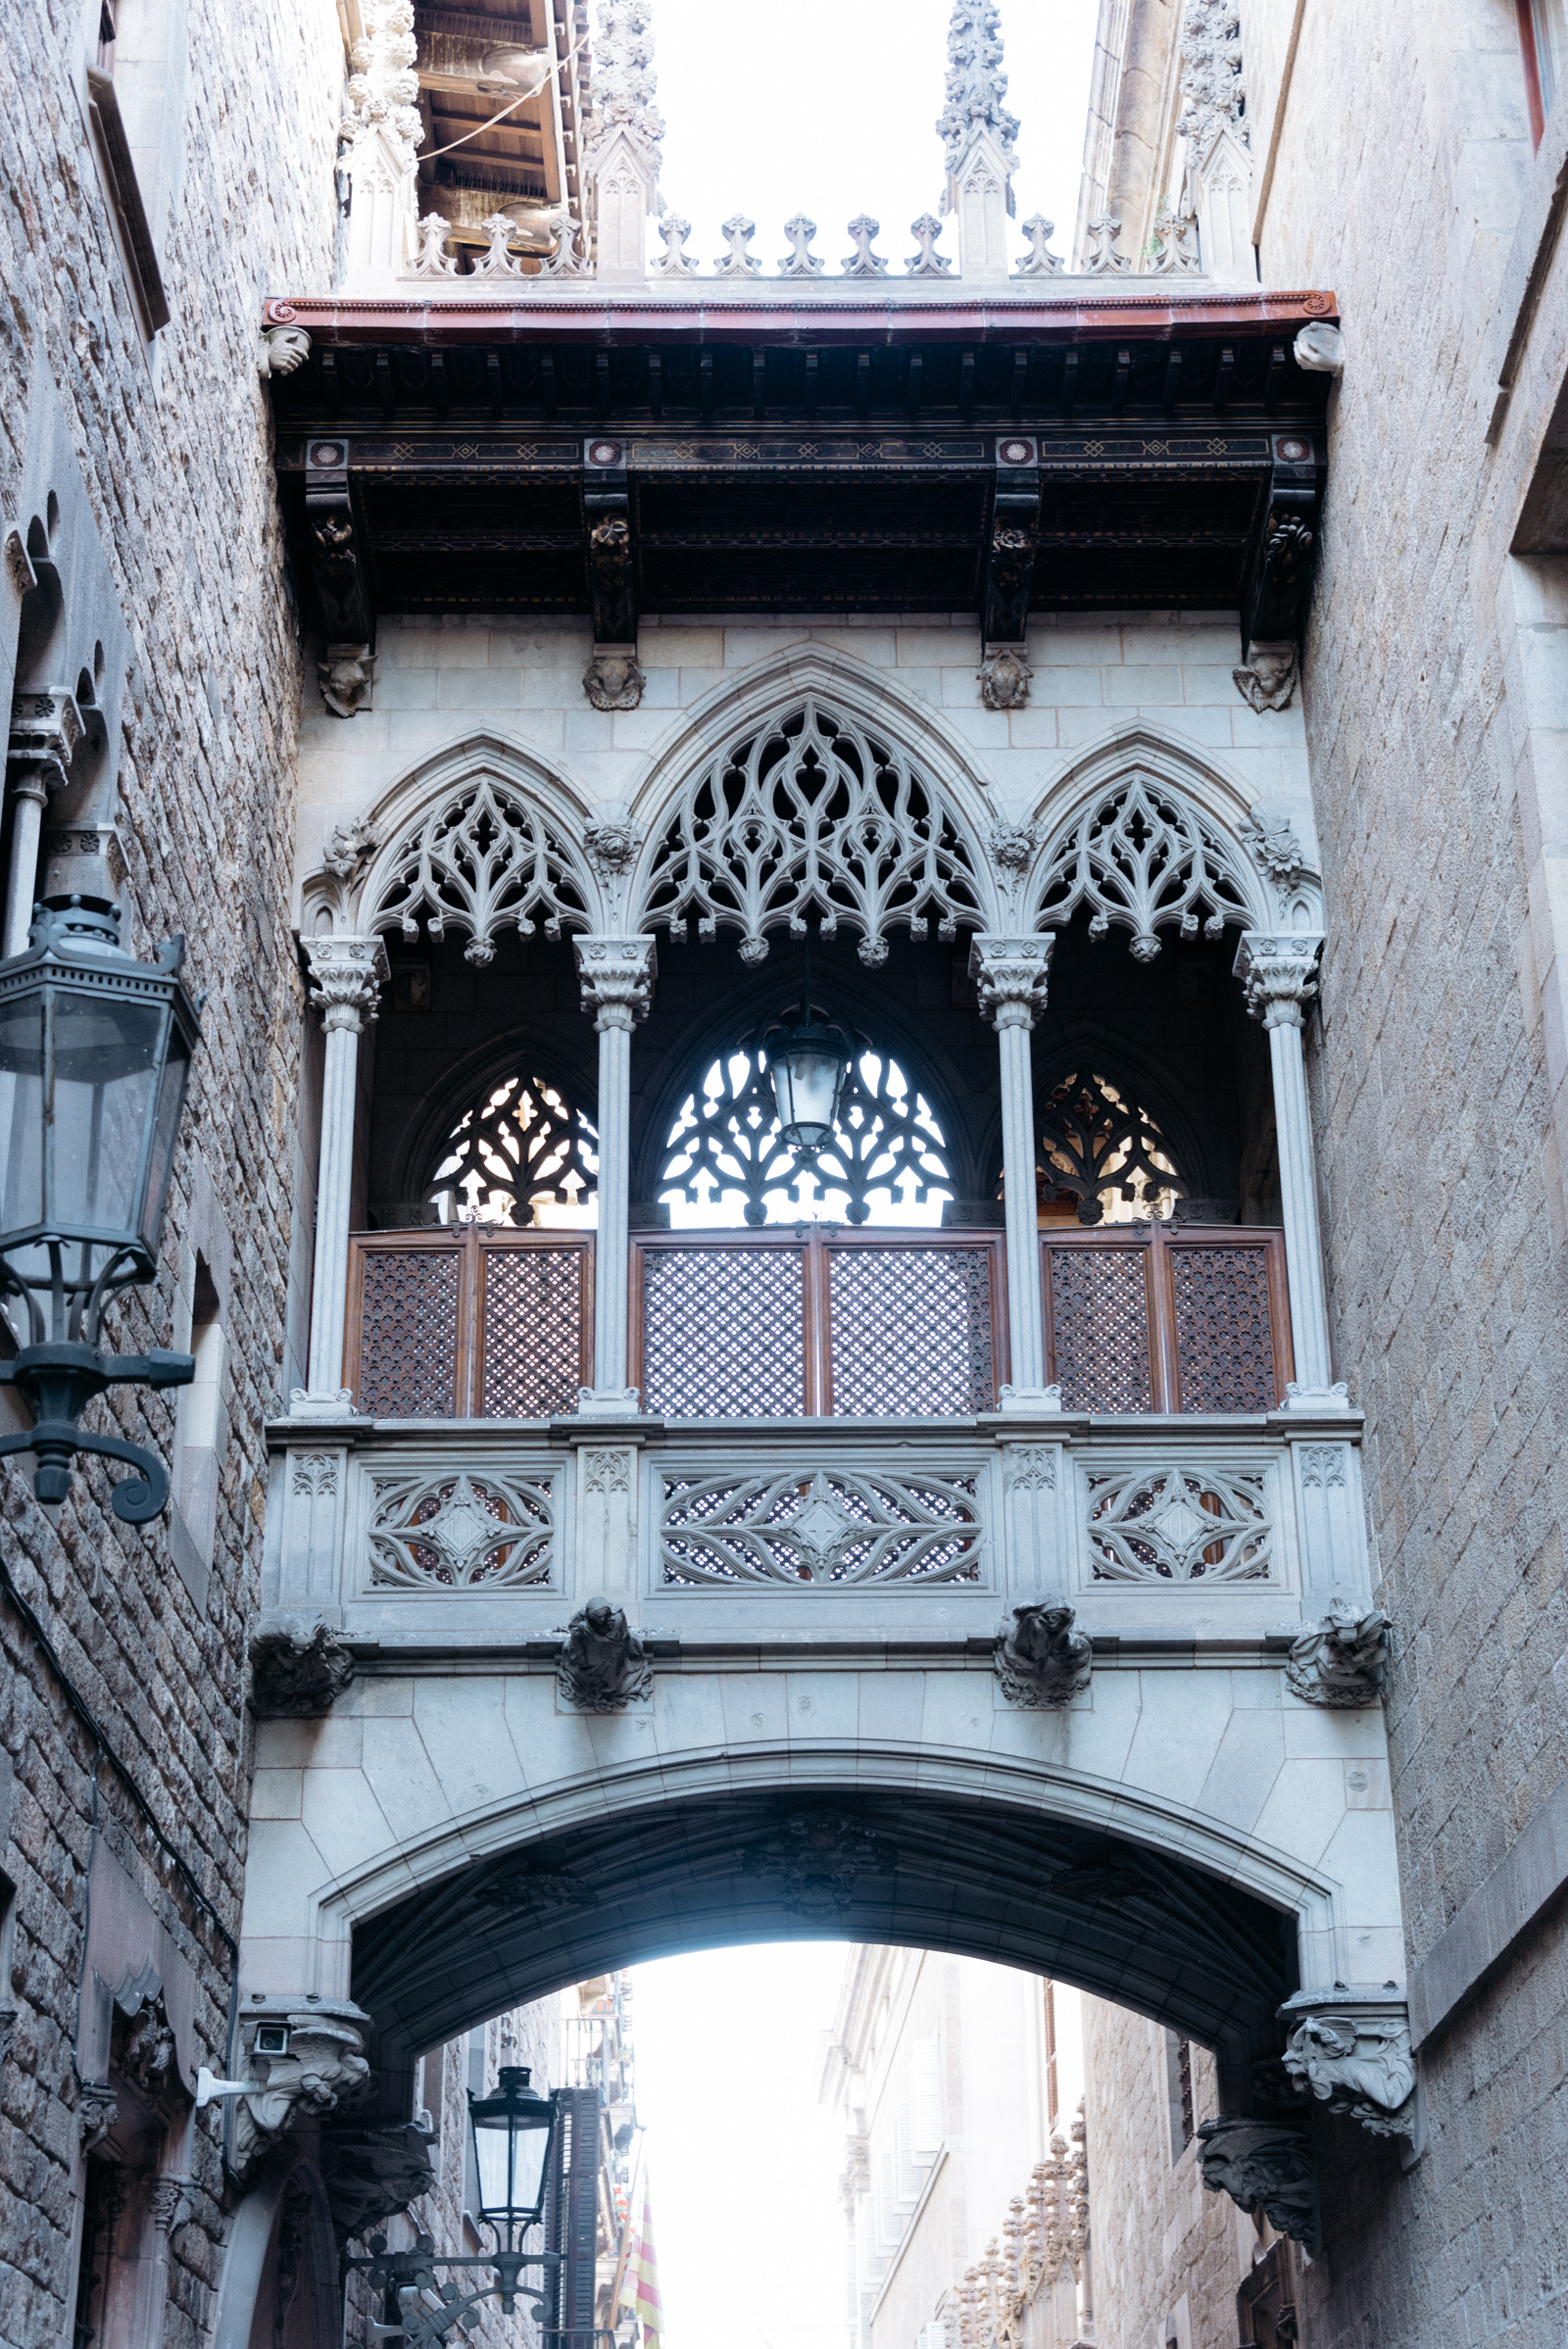 The Architectural Secrets Of Barcelona's Gothic